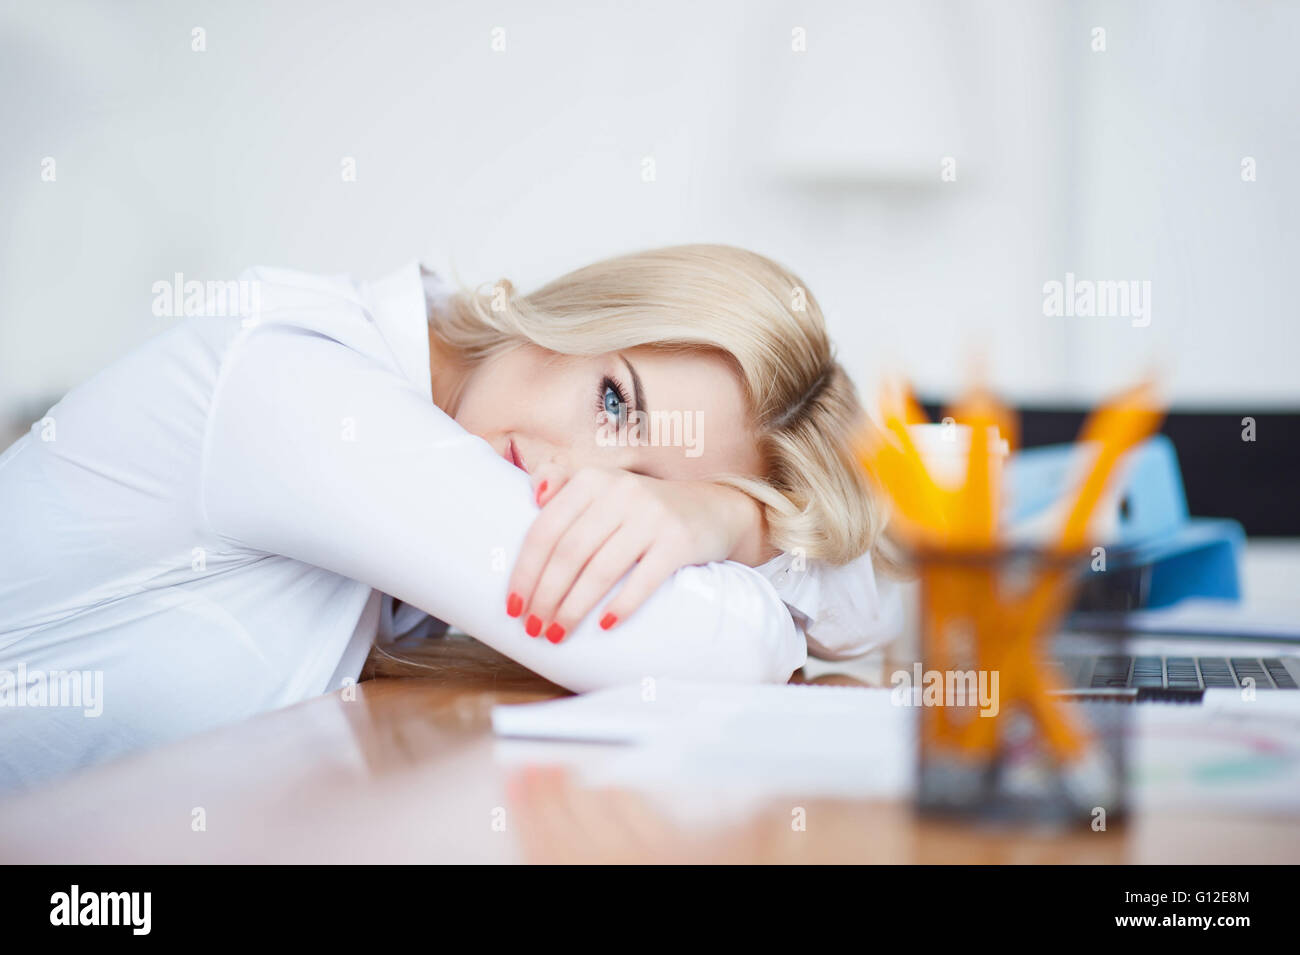 Attractive woman leaning on the table Stock Photo